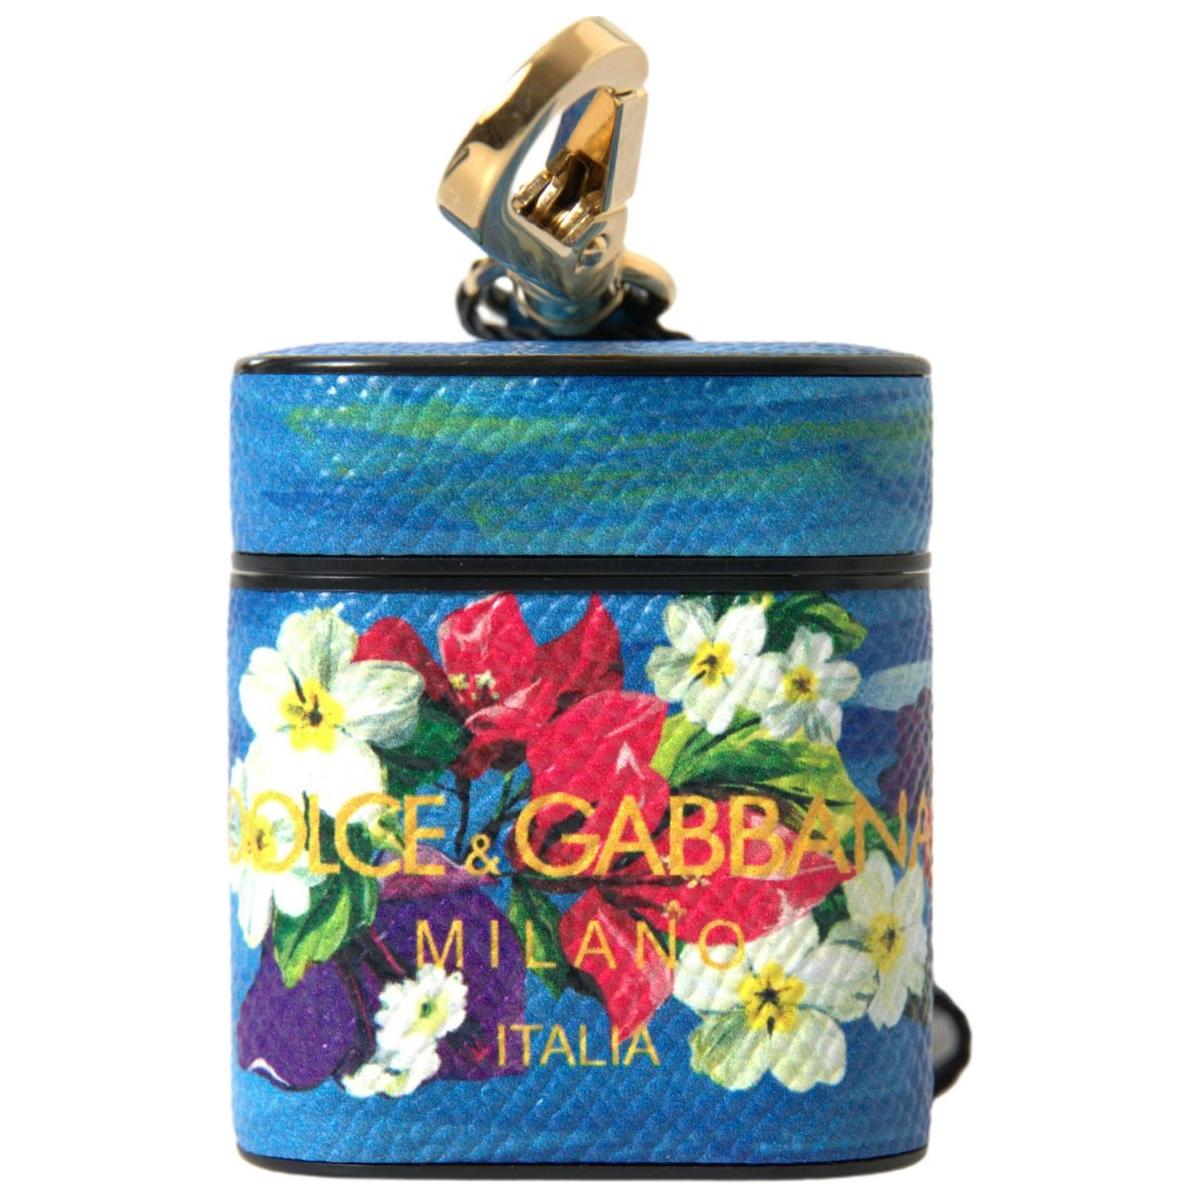 Dolce & Gabbana Chic Blue Floral Leather Airpods Case blue-floral-dauphine-leather-logo-printed-airpods-case